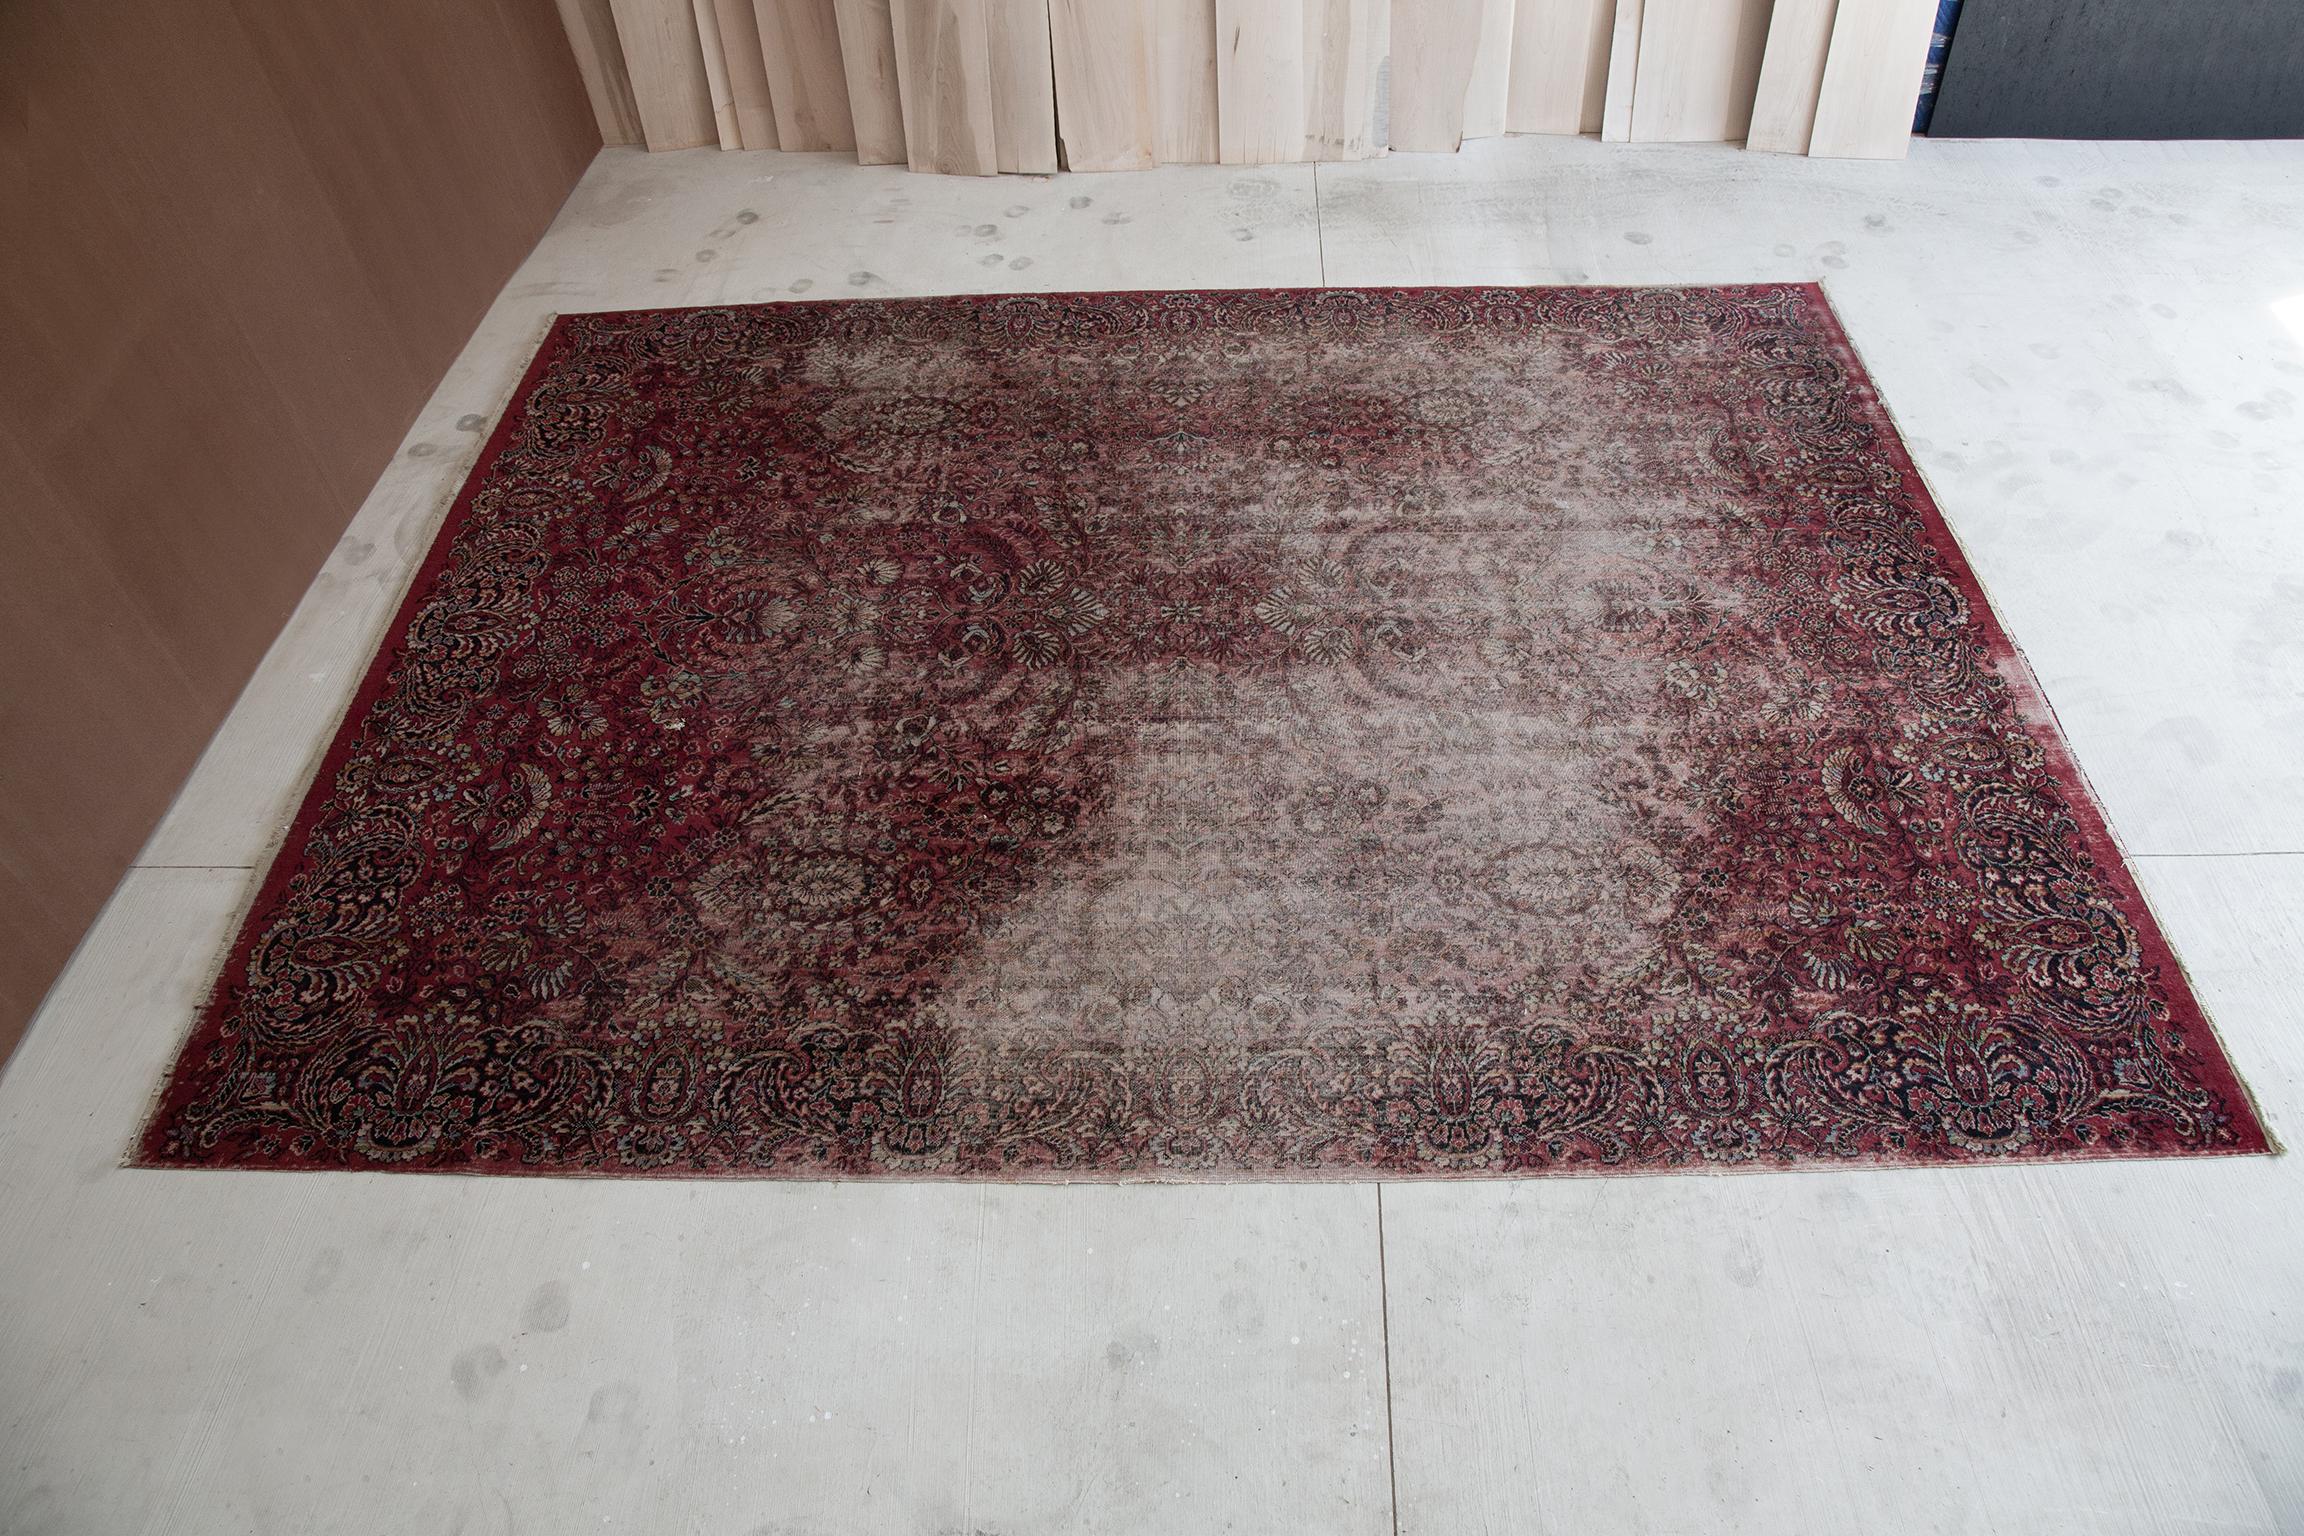 Beautifully aged and distressed antique vegetable dyed rug. There is a small hole from a sofa leg, but a local rug repair can easily mend it and make it disappear. Measures: 9x12.